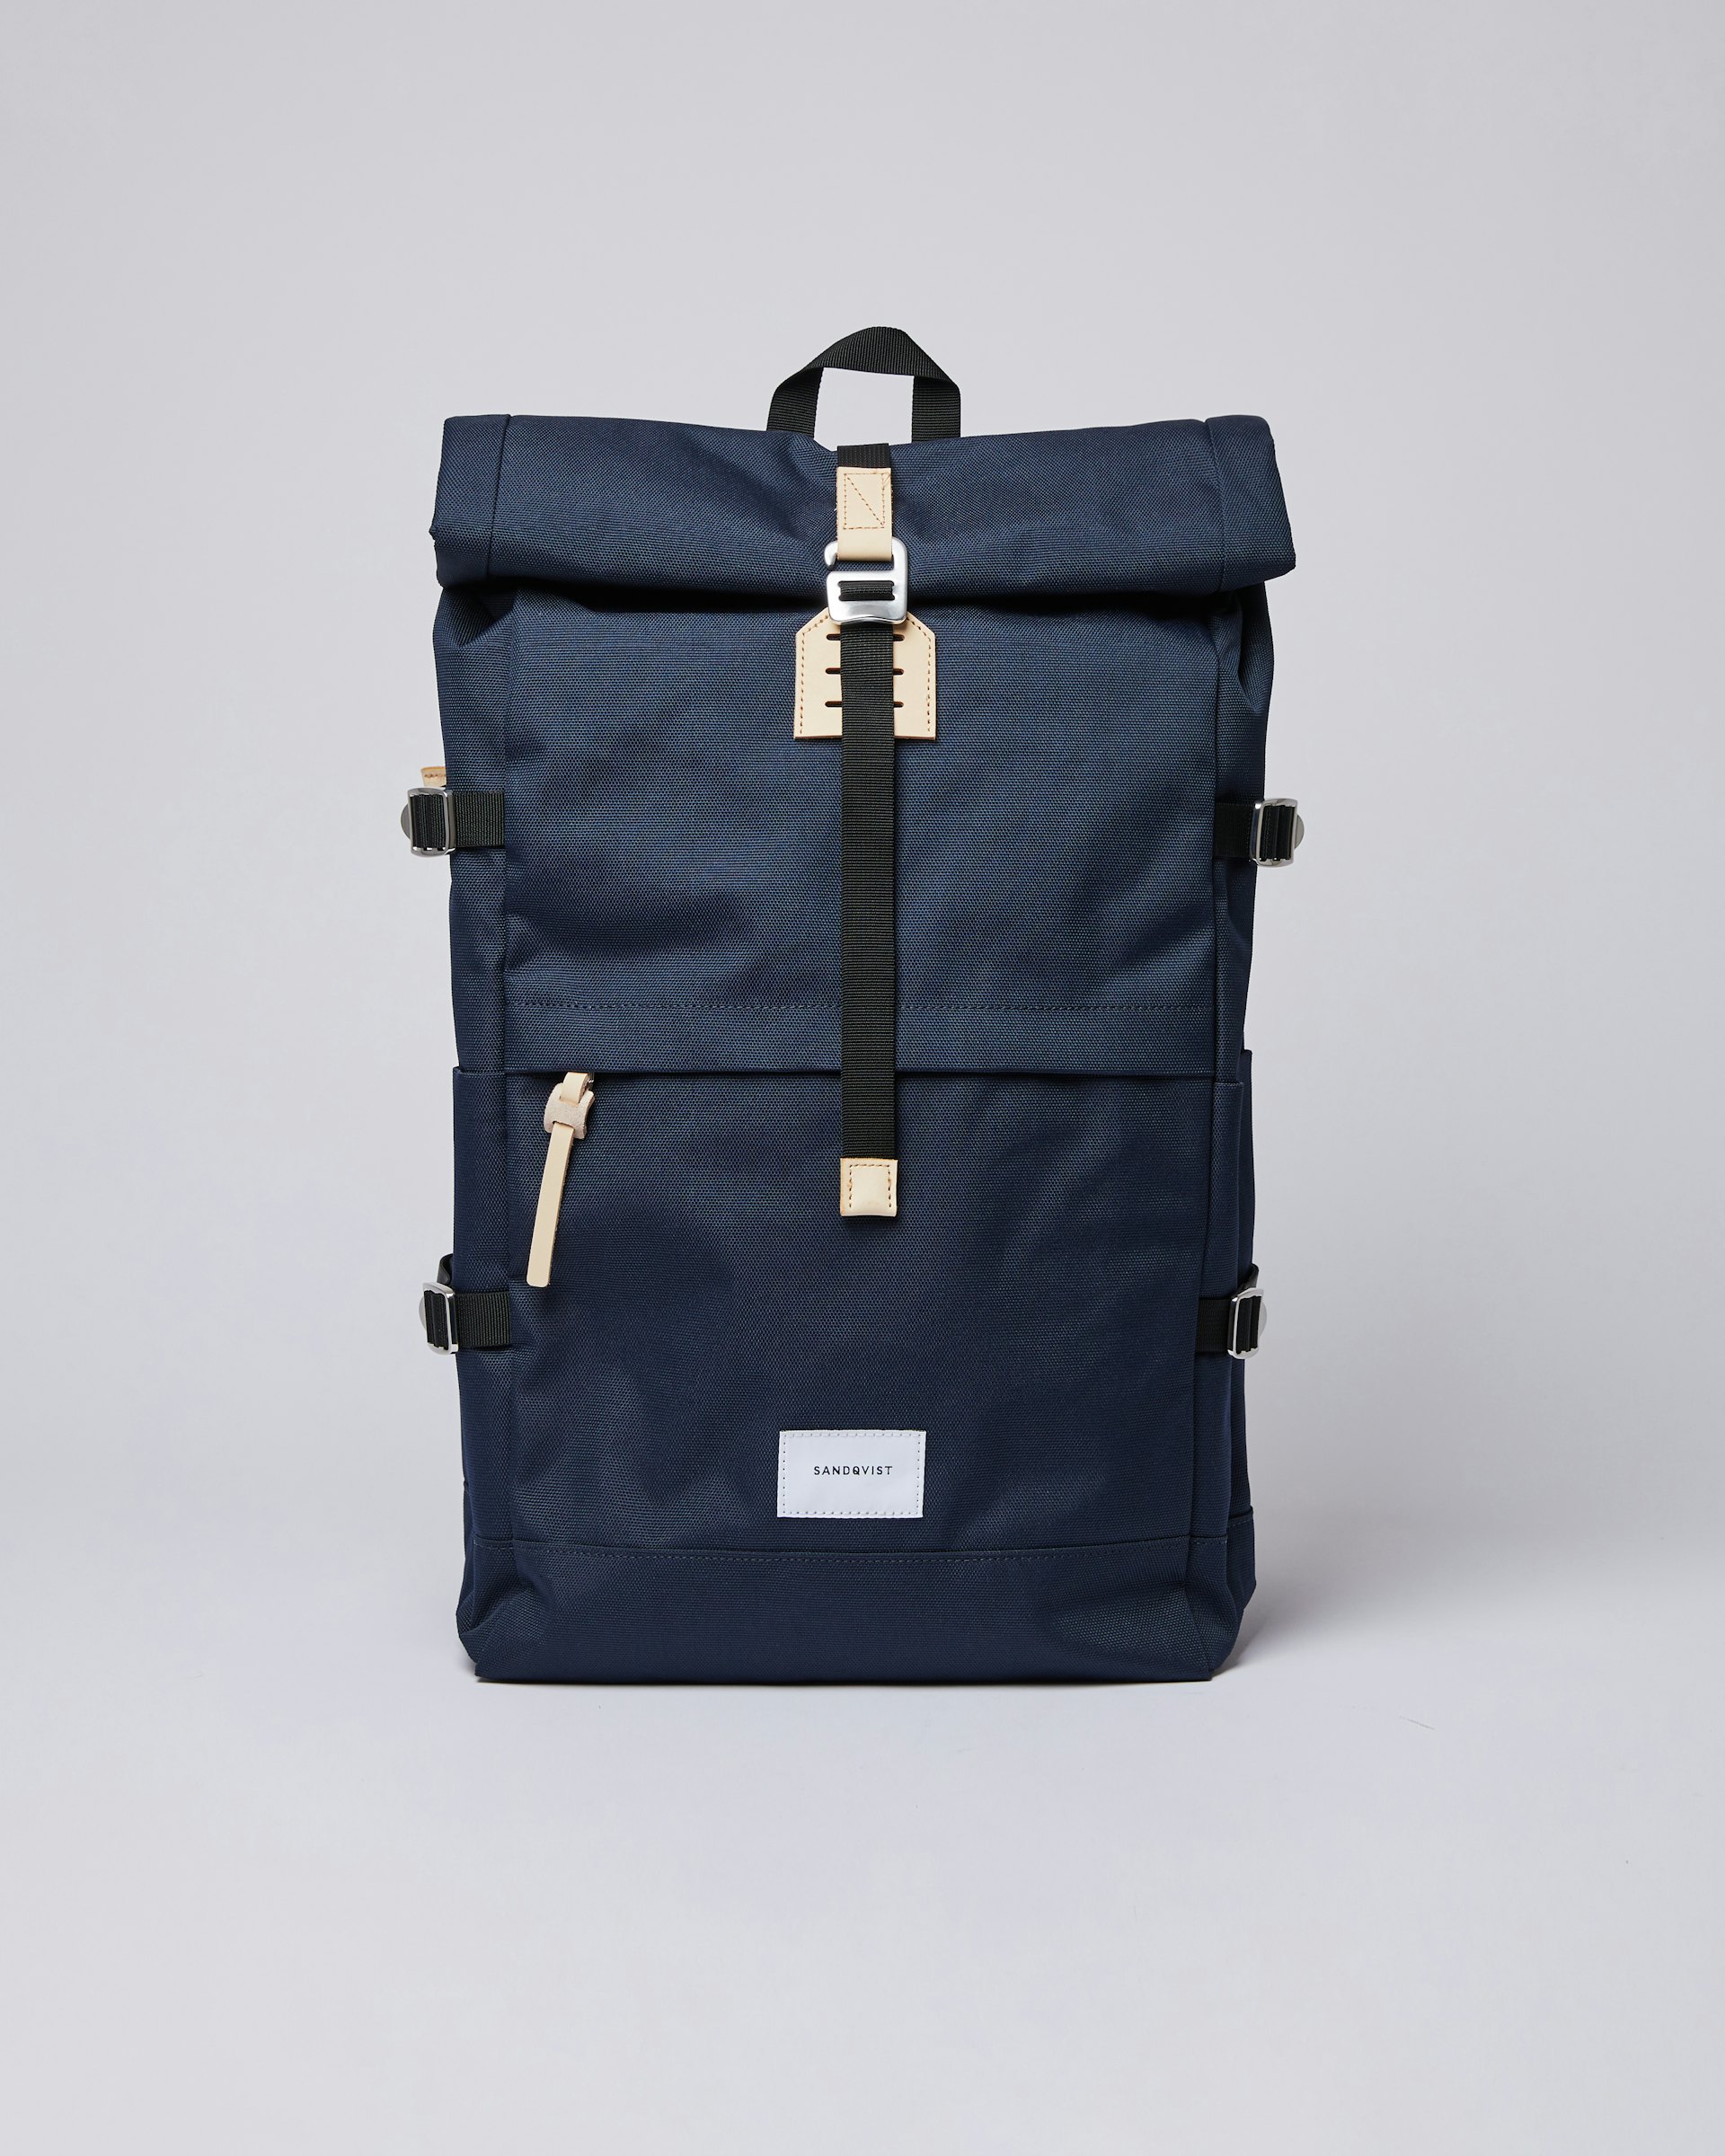 Bernt belongs to the category Backpacks and is in color navy (1 of 6)